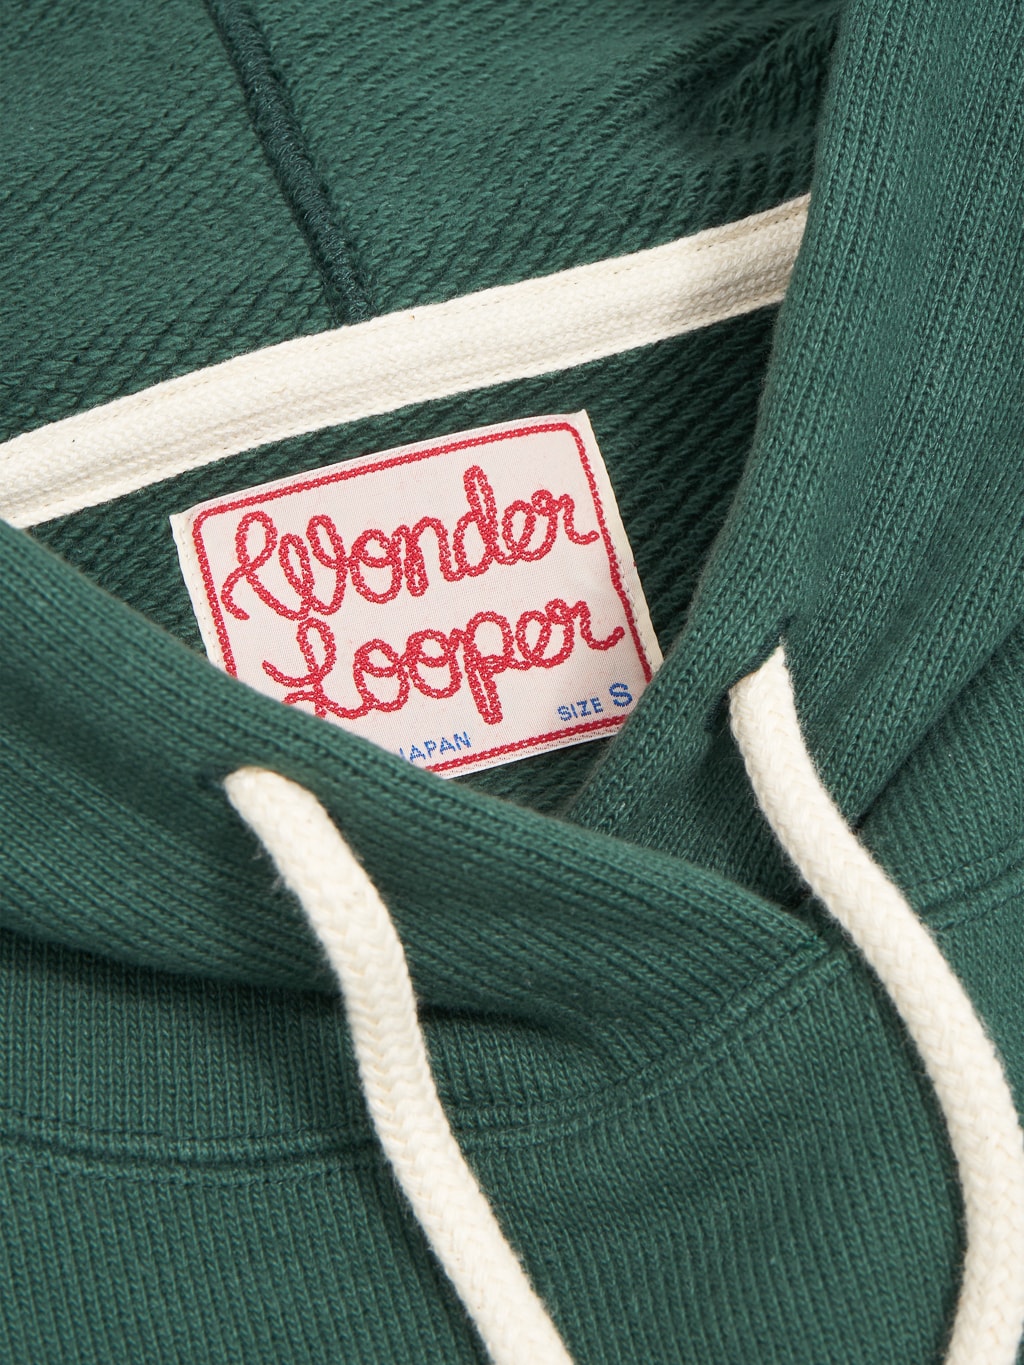 Wonder Looper Pullover Hoodie Double Heavyweight French Terry green athletic brand label